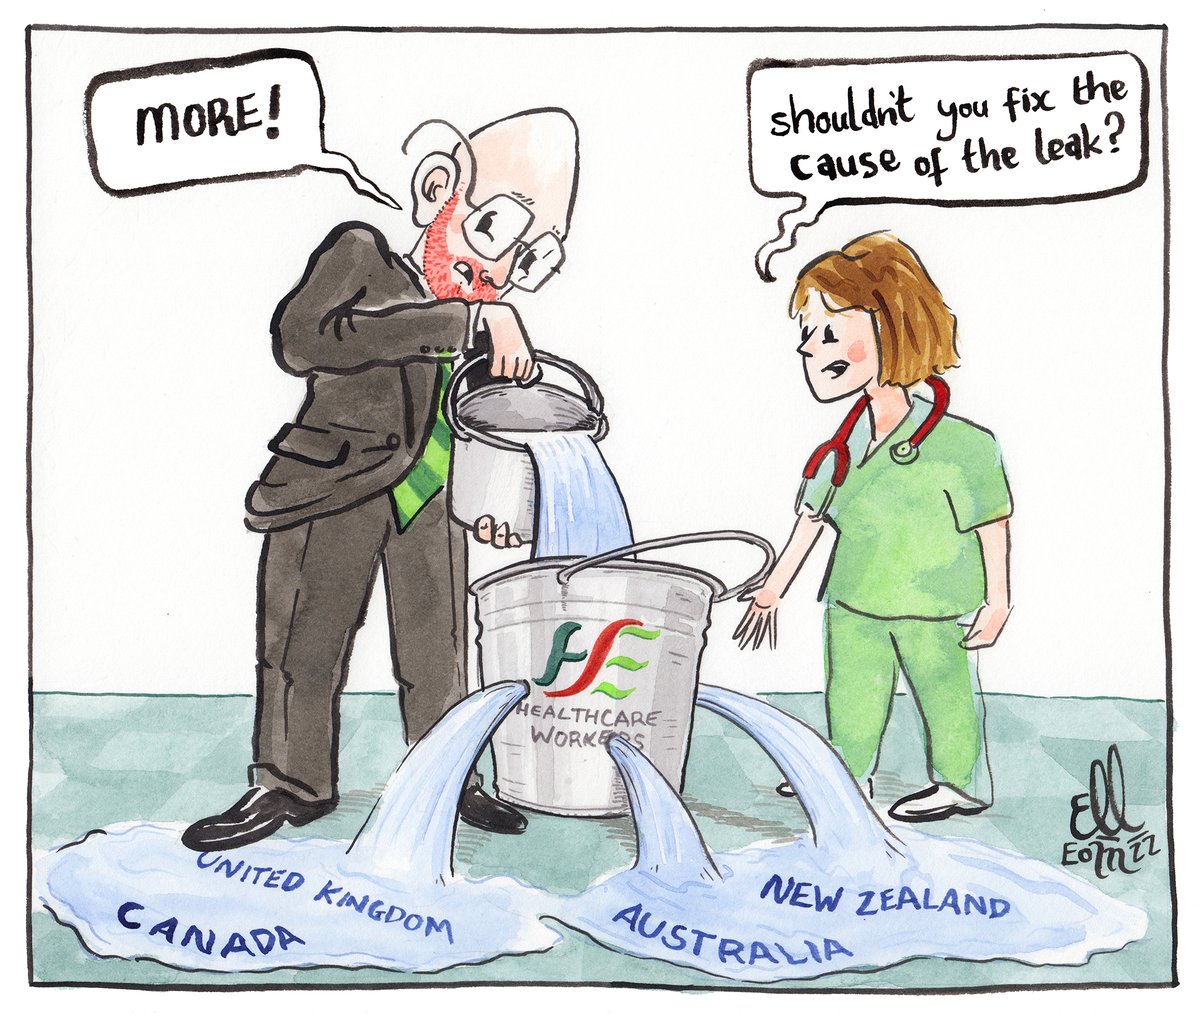 We need to fix the cause of the leaks. My latest cartoon for @med_indonews #DoctorEmigration #HSE #Cartoon